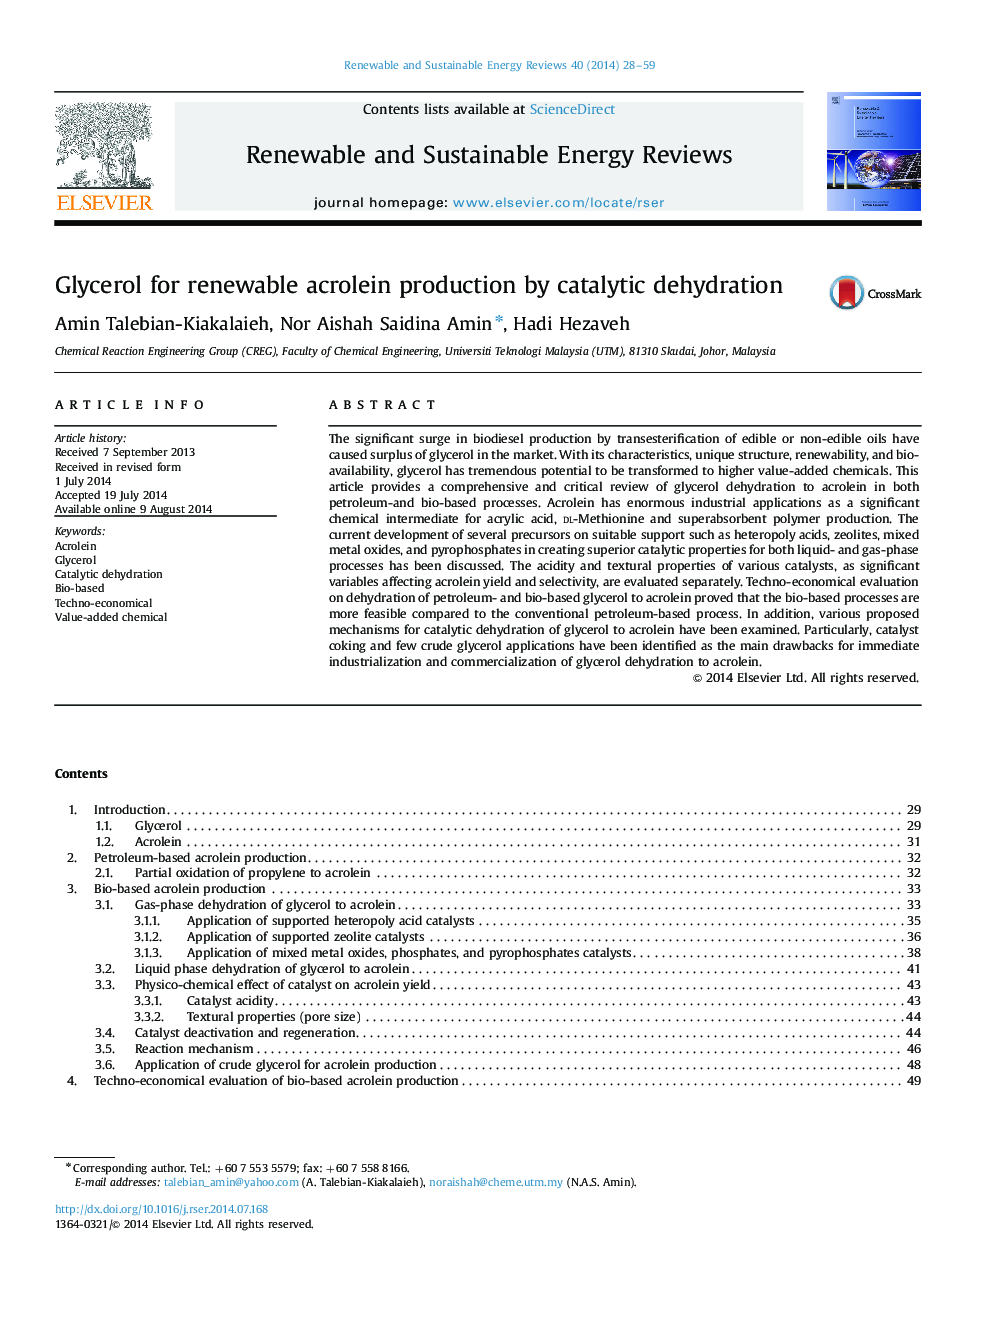 Glycerol for renewable acrolein production by catalytic dehydration